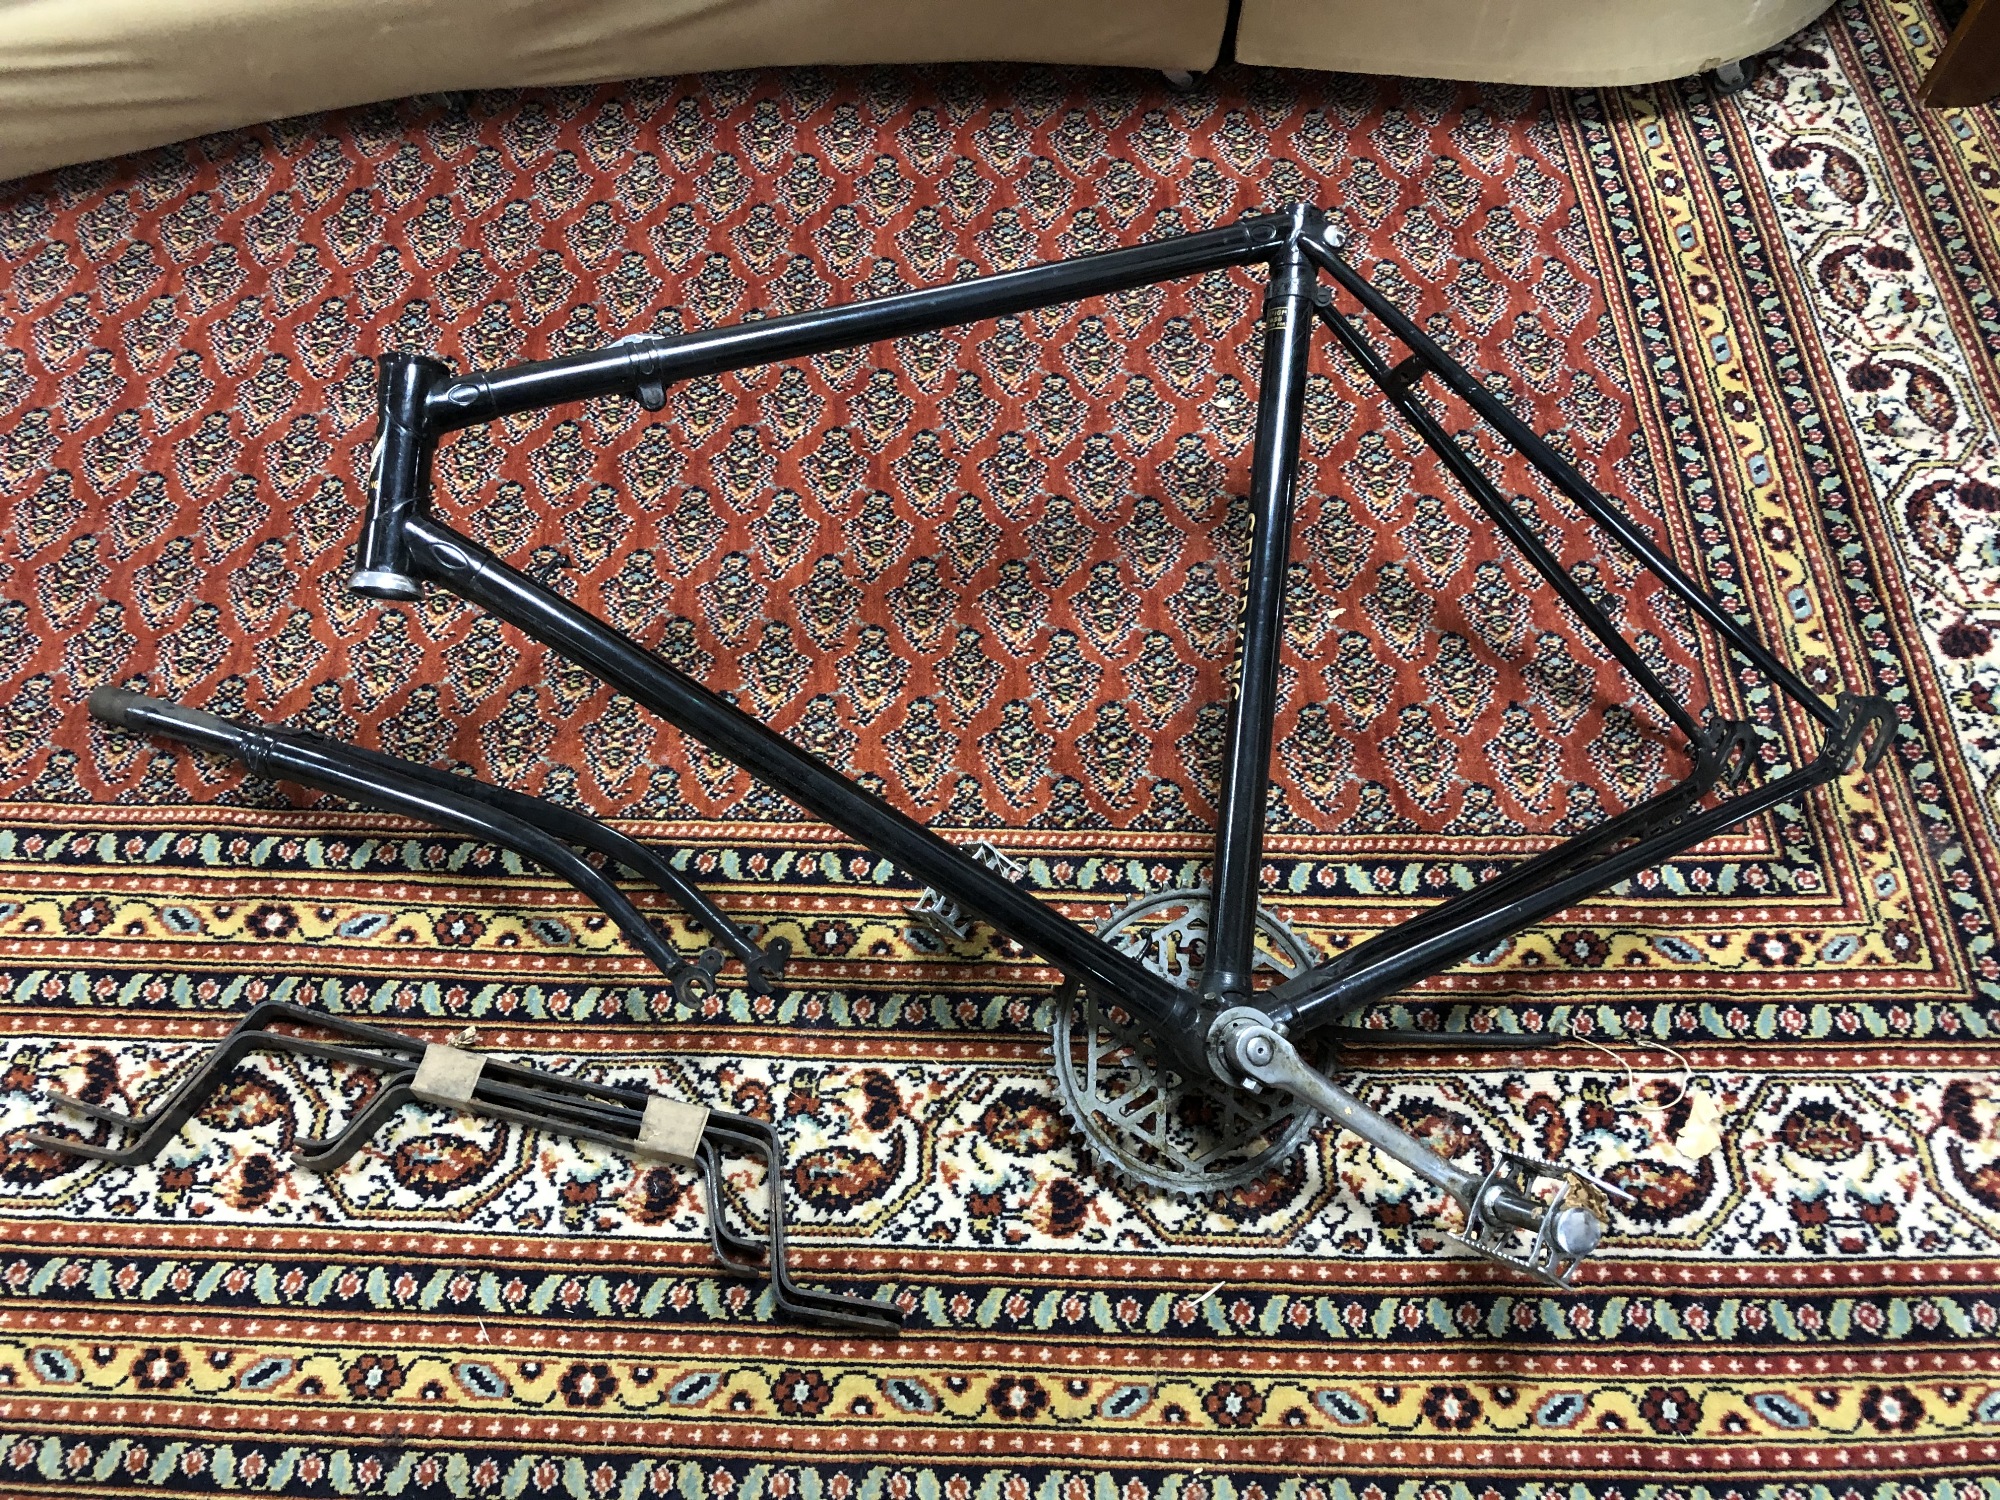 A dismantled mid century bicycle frame - Image 2 of 6